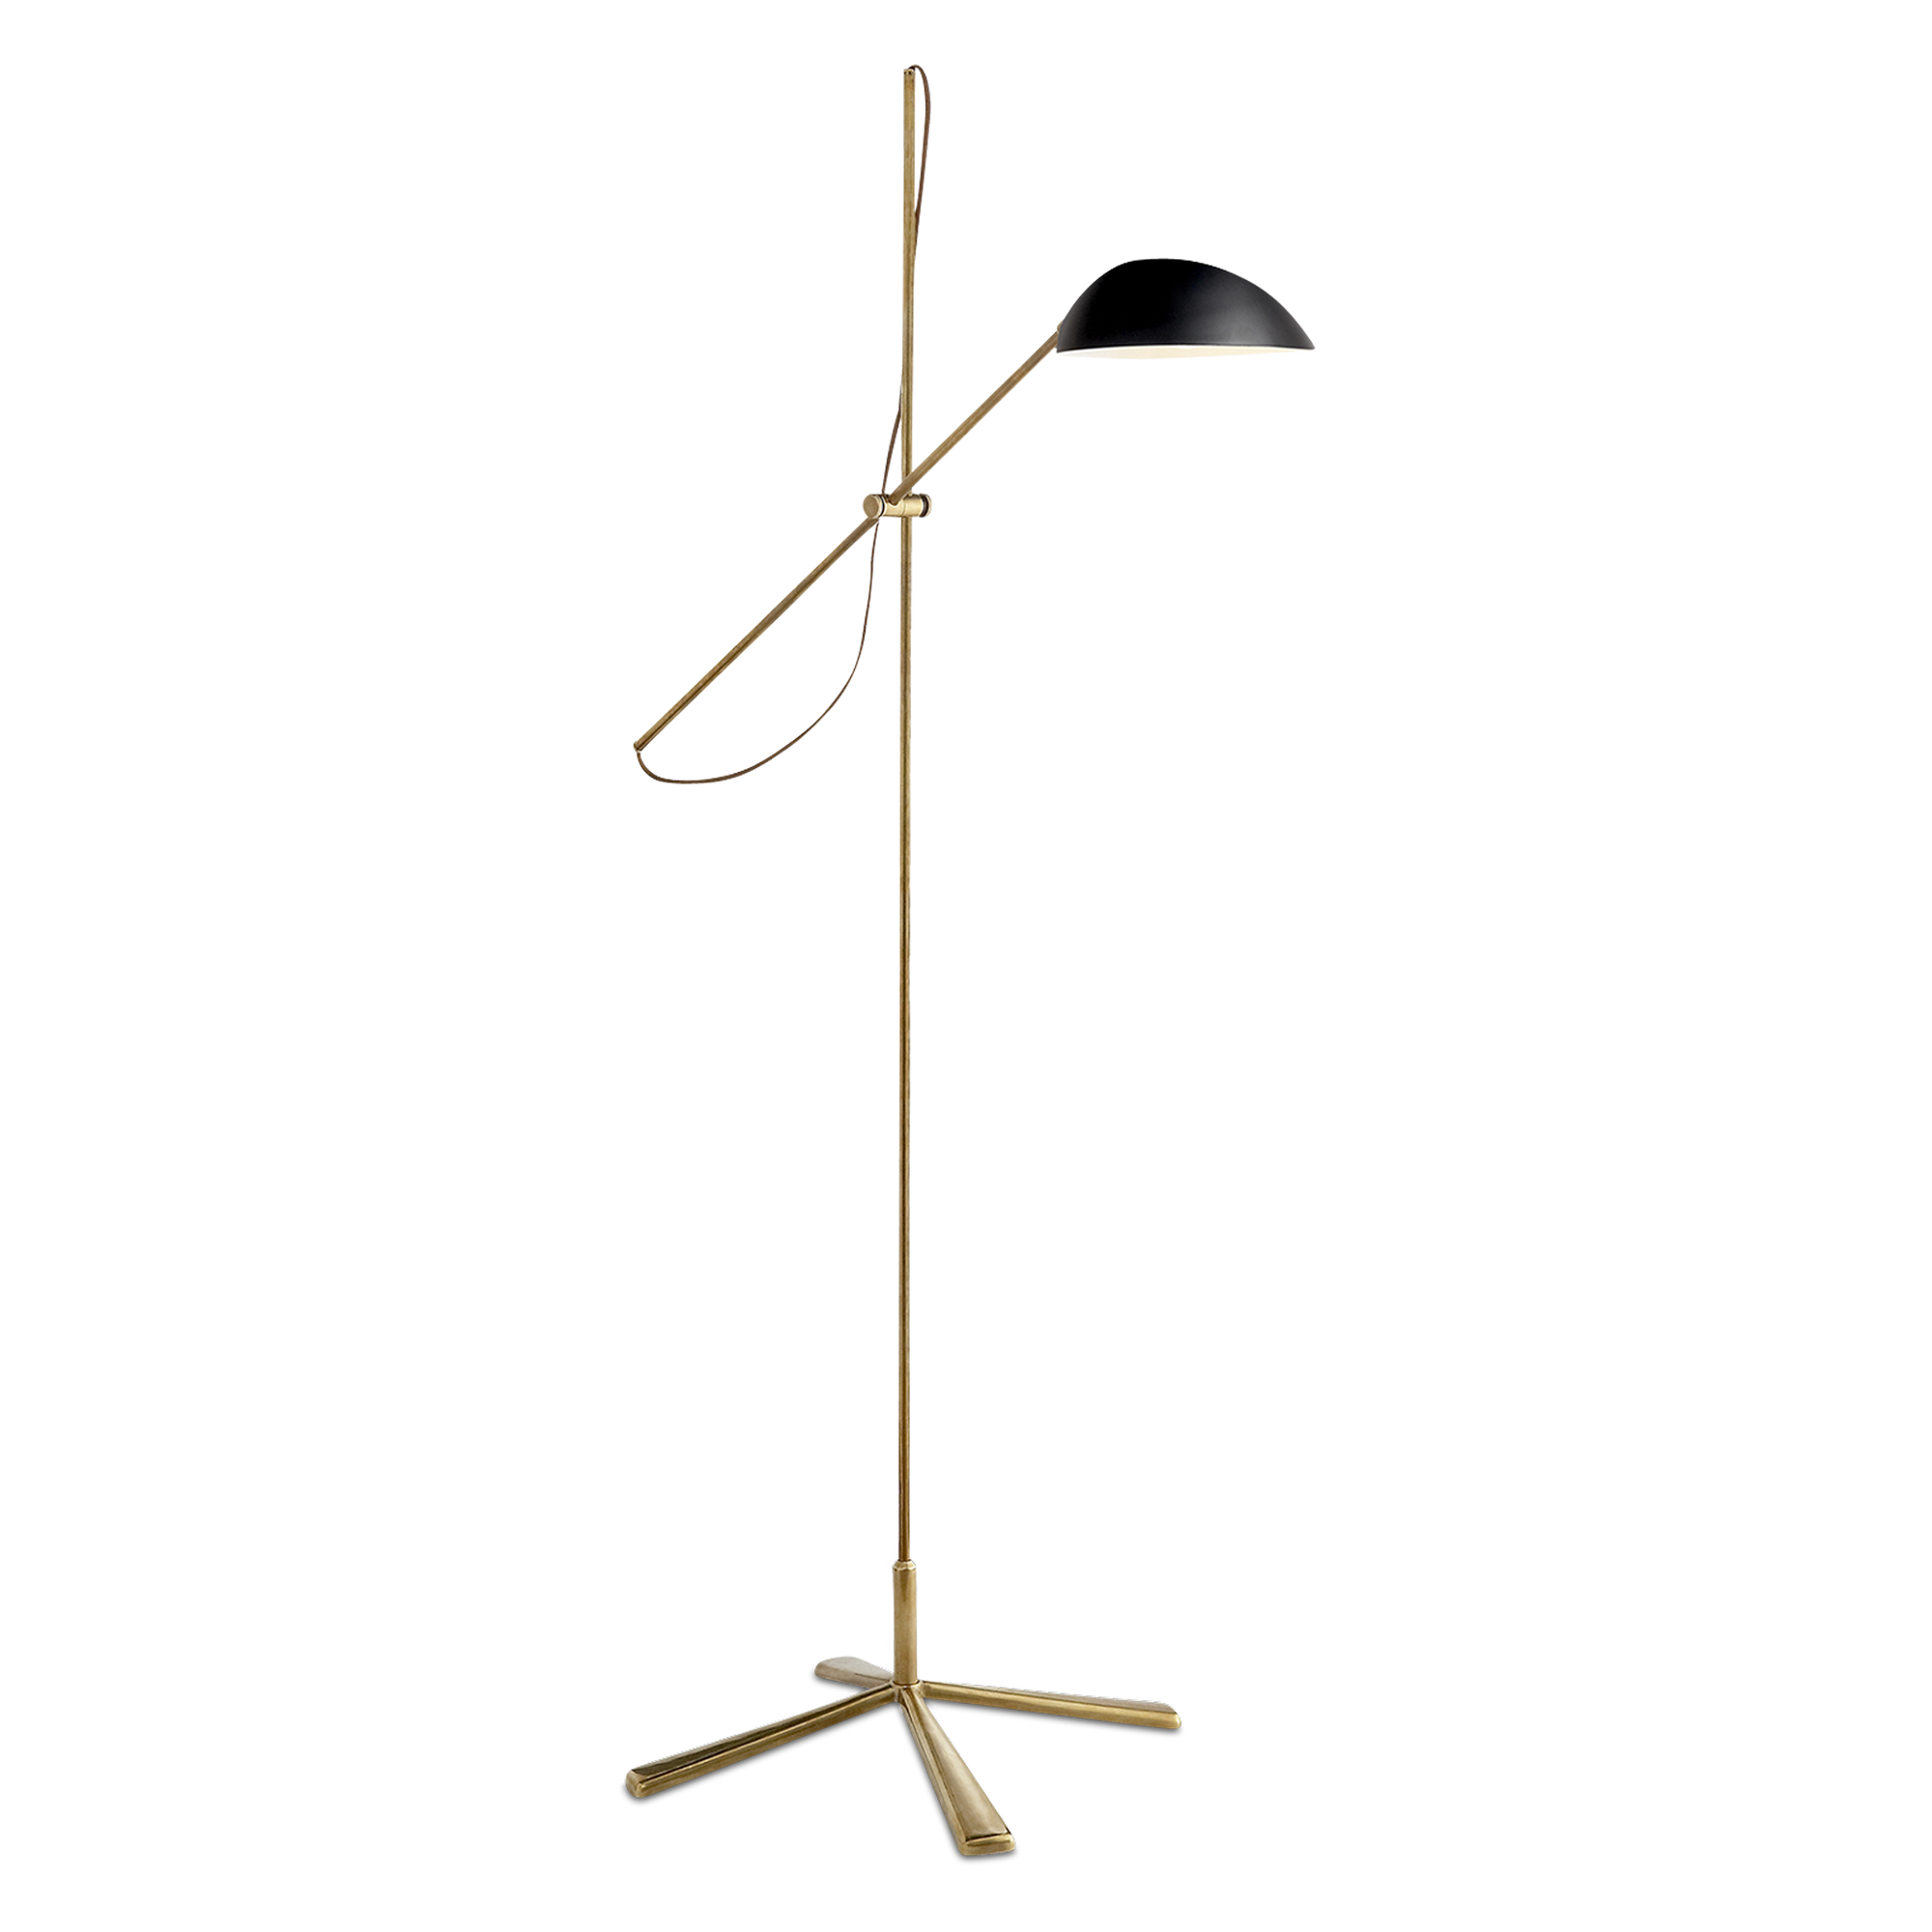 A minimalist floor lamp with an adjustable arm and exposed wire for a contemporary feel.